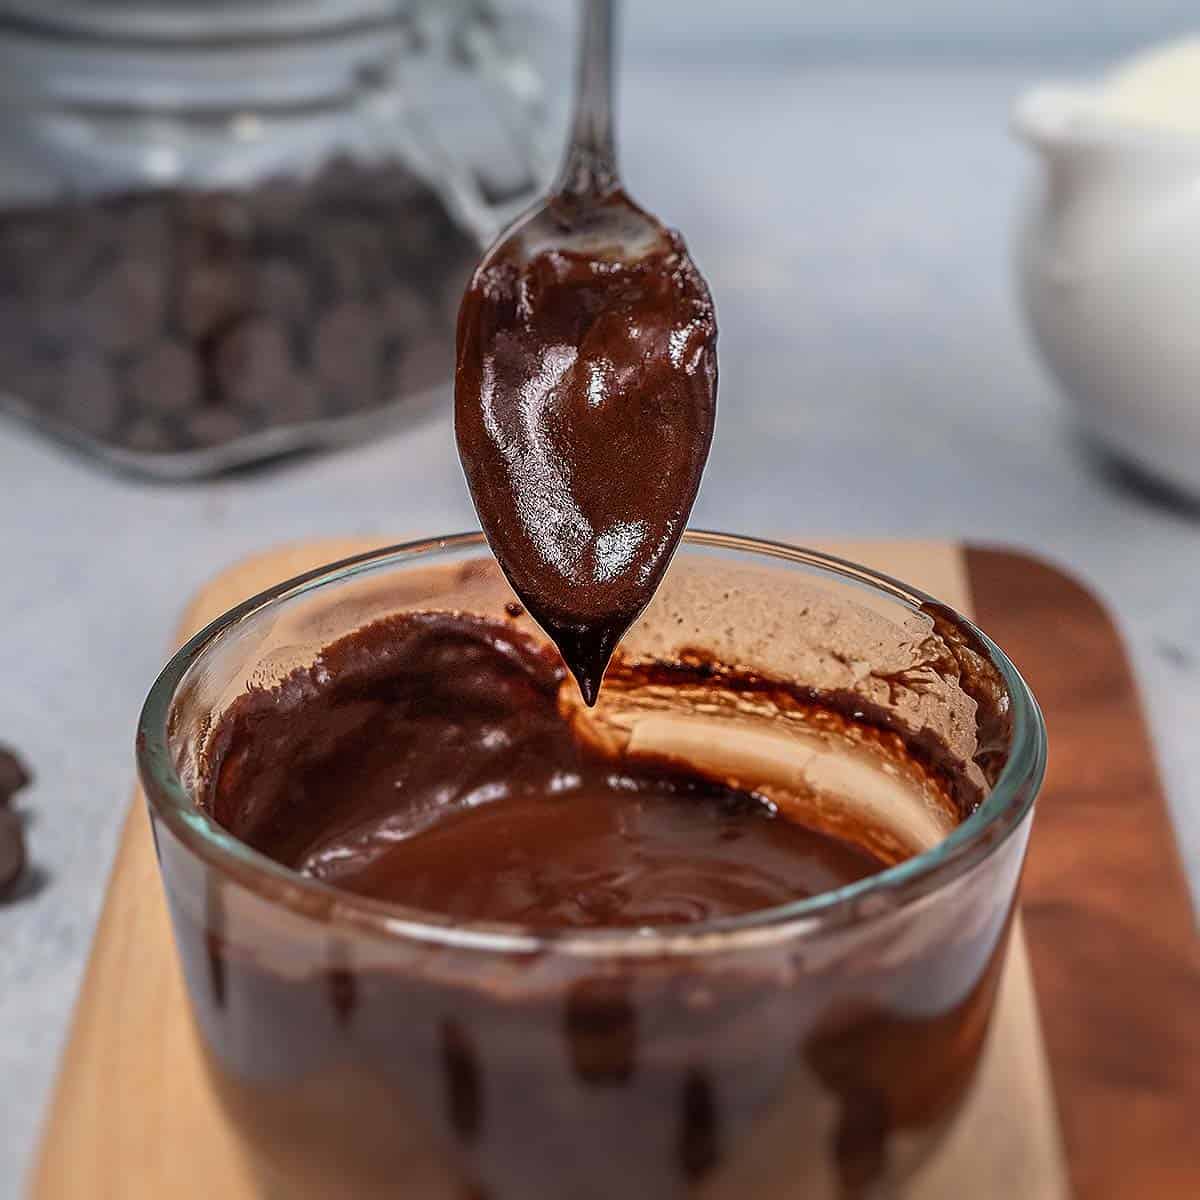 Drizzling chocolate sauce with a spoon into a bowl